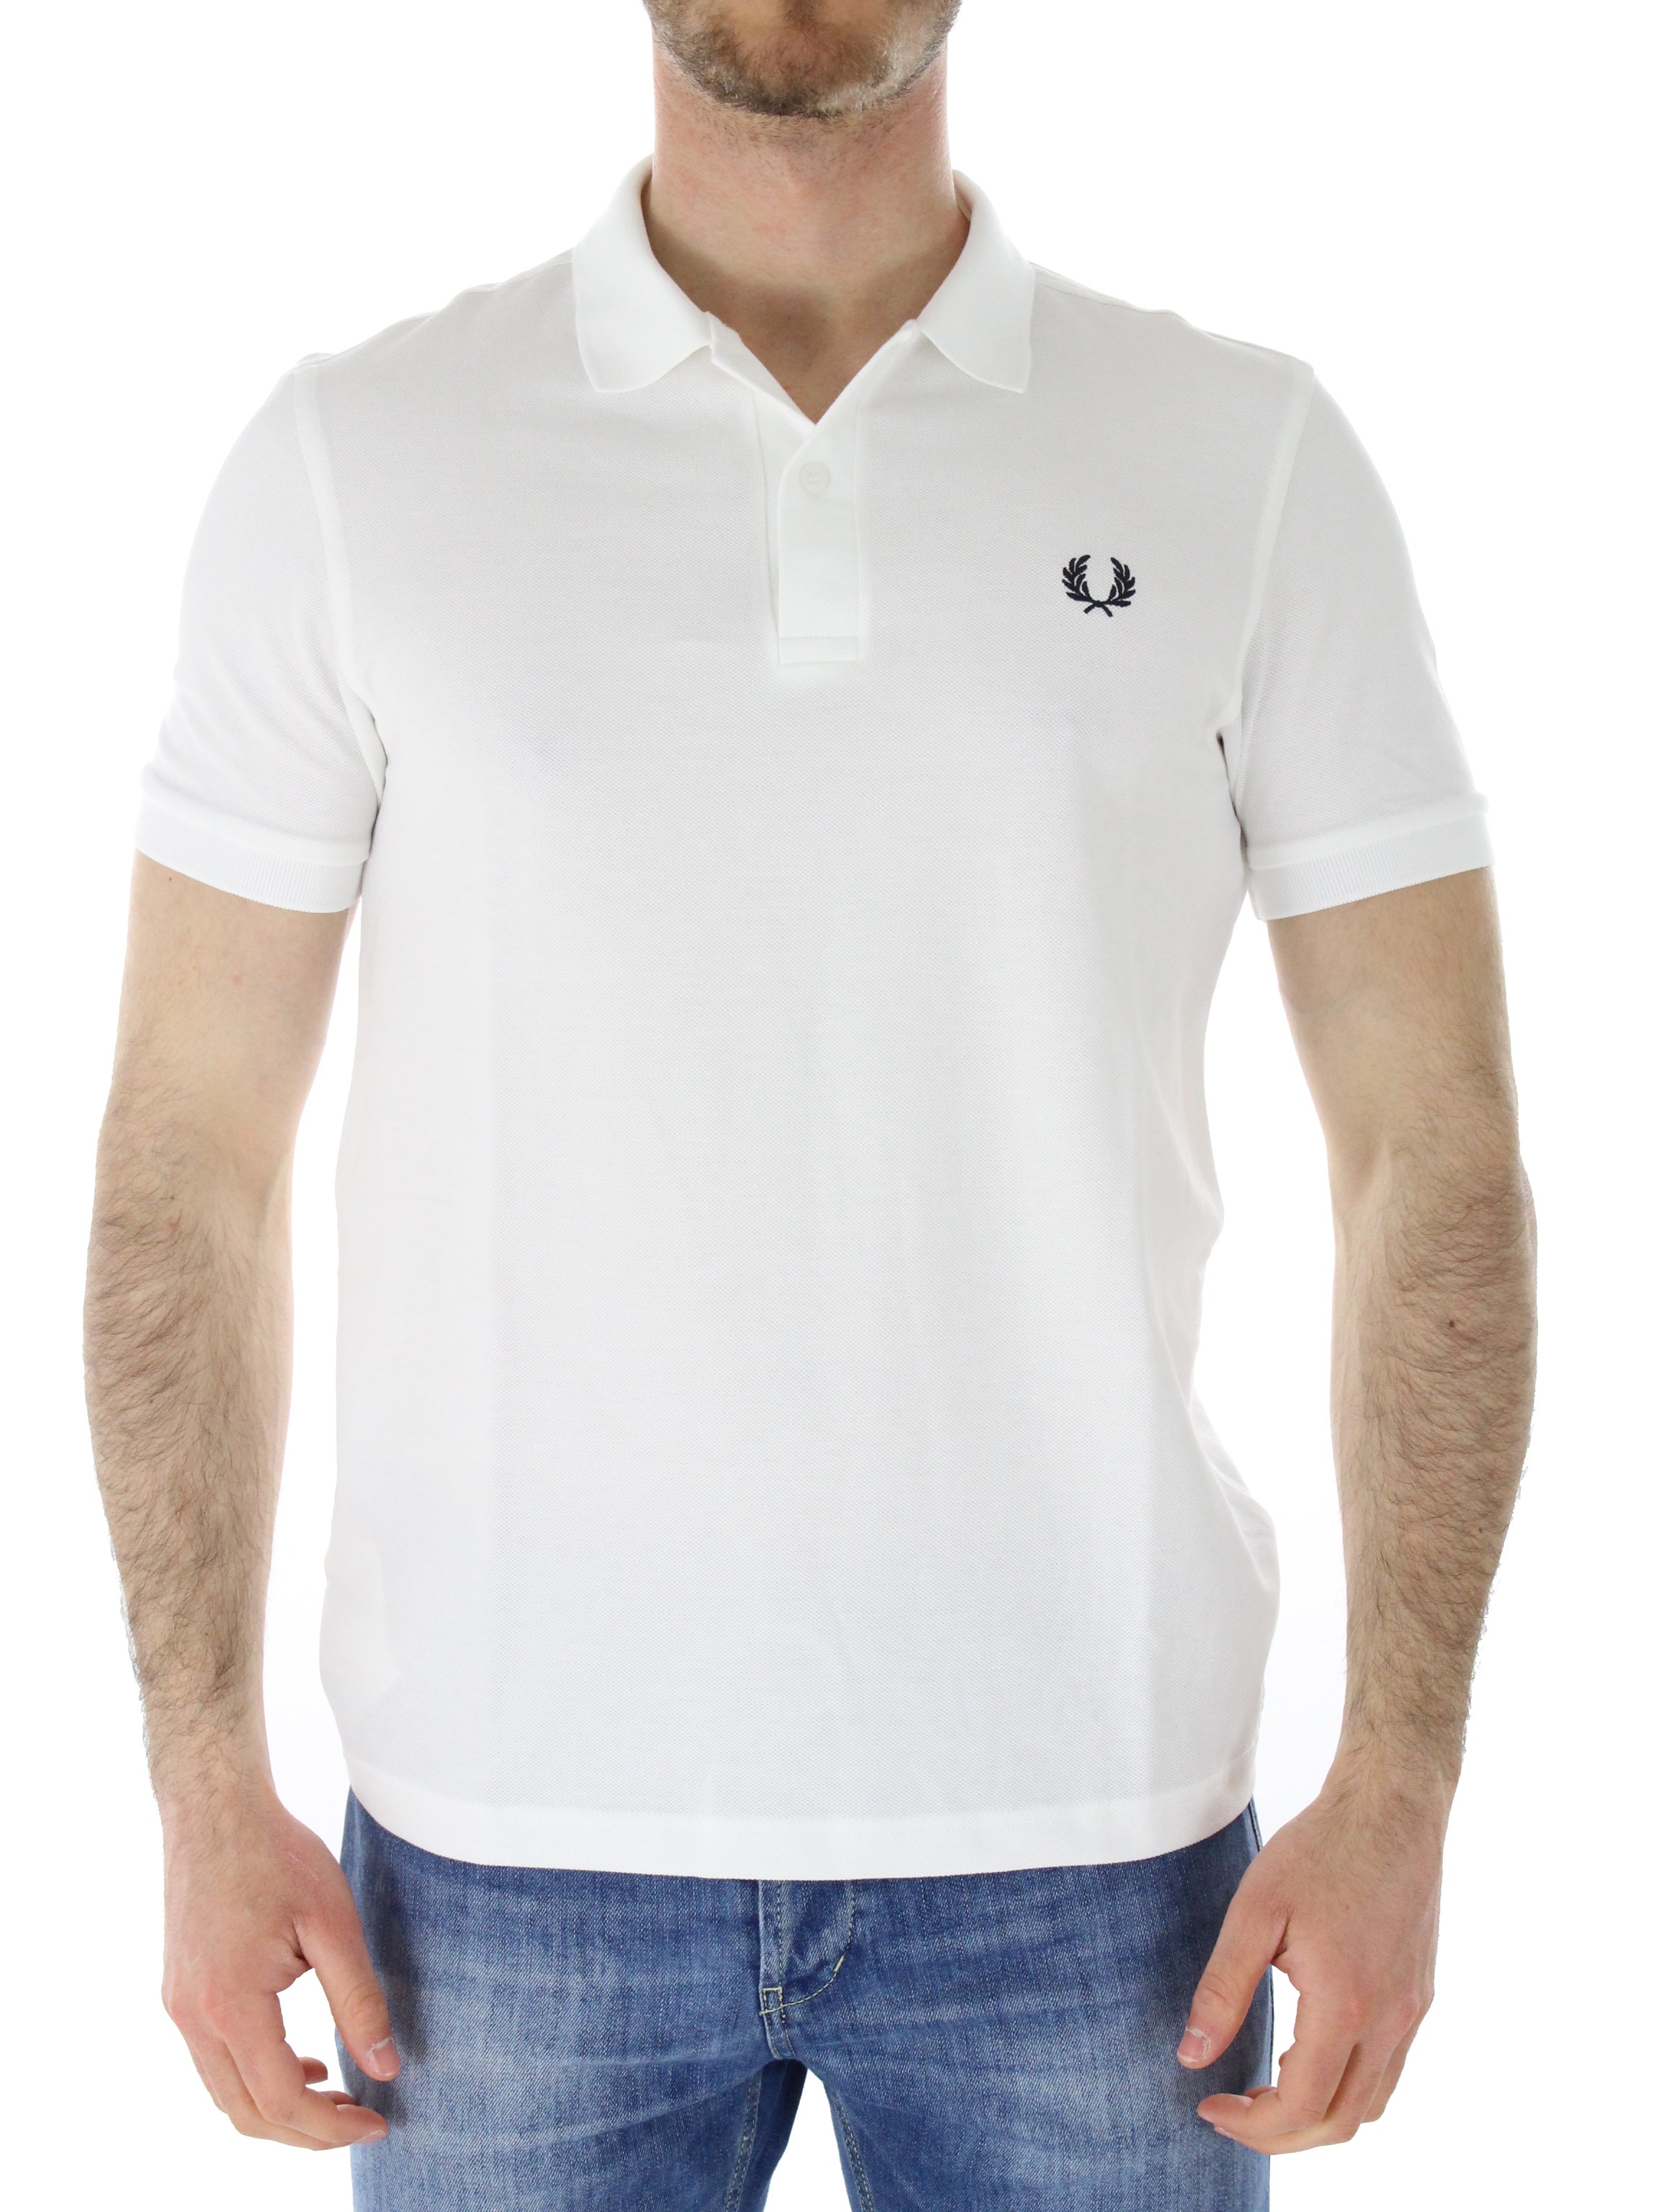 Fred perry polo m/m